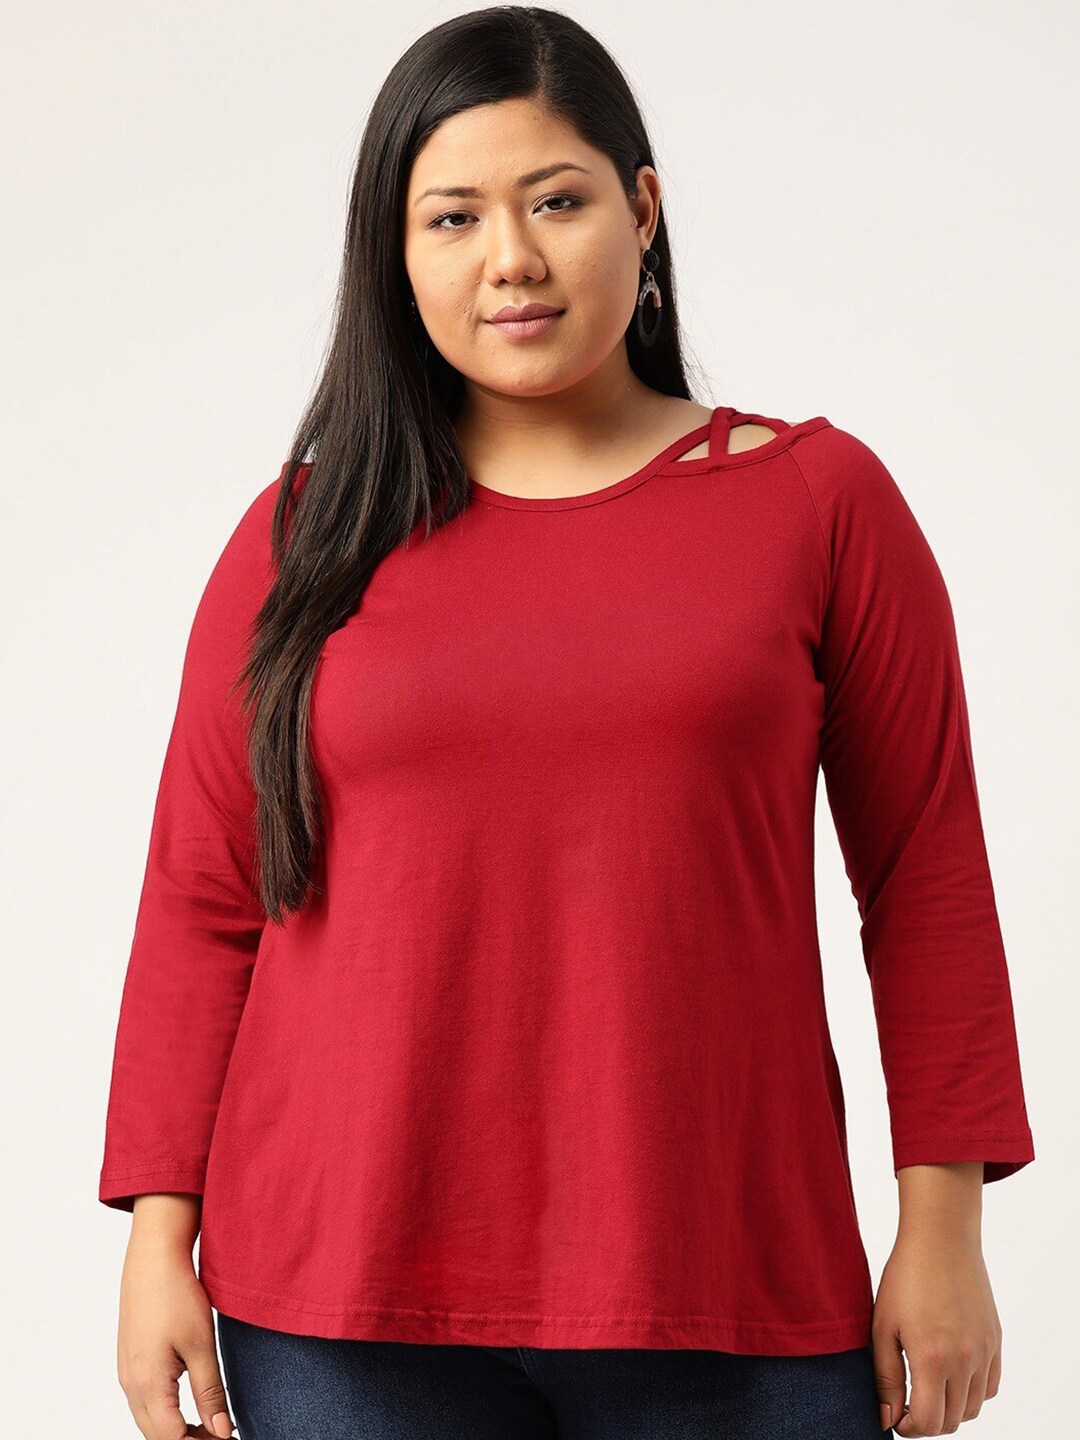 theRebelinme Plus Size Women Maroon Solid Cotton Top Price in India